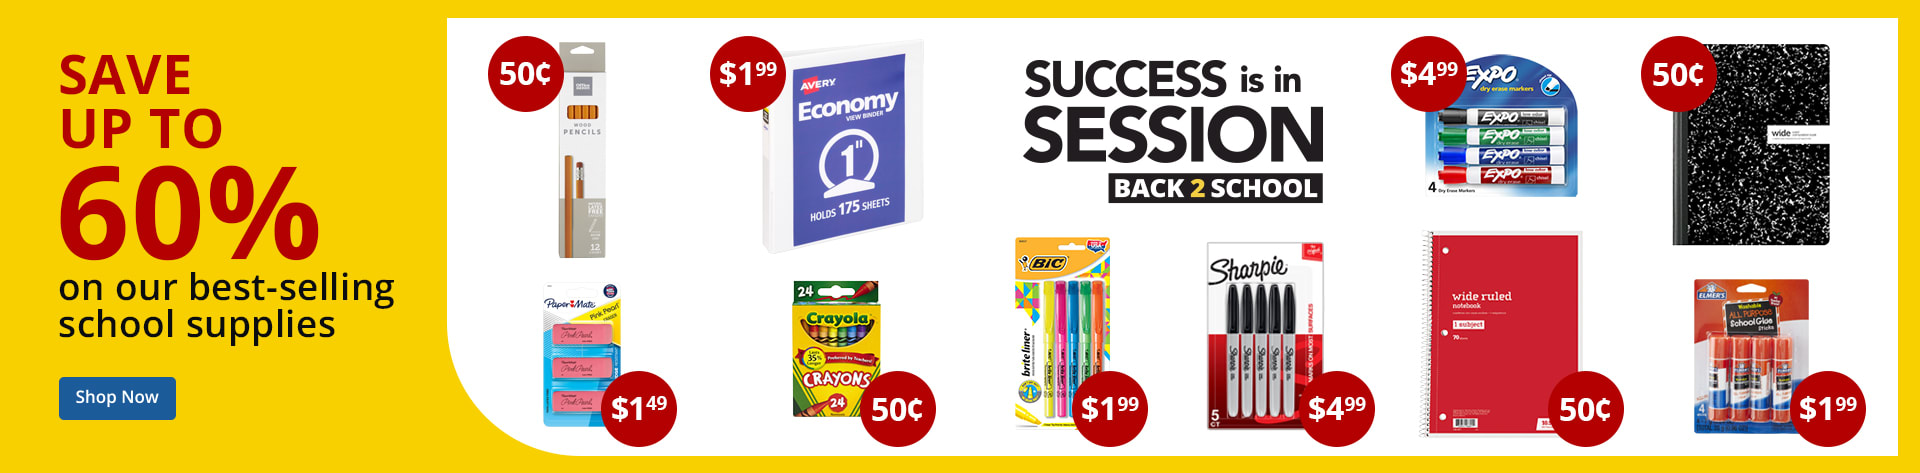 Save up to 60% on our best-selling school supplies